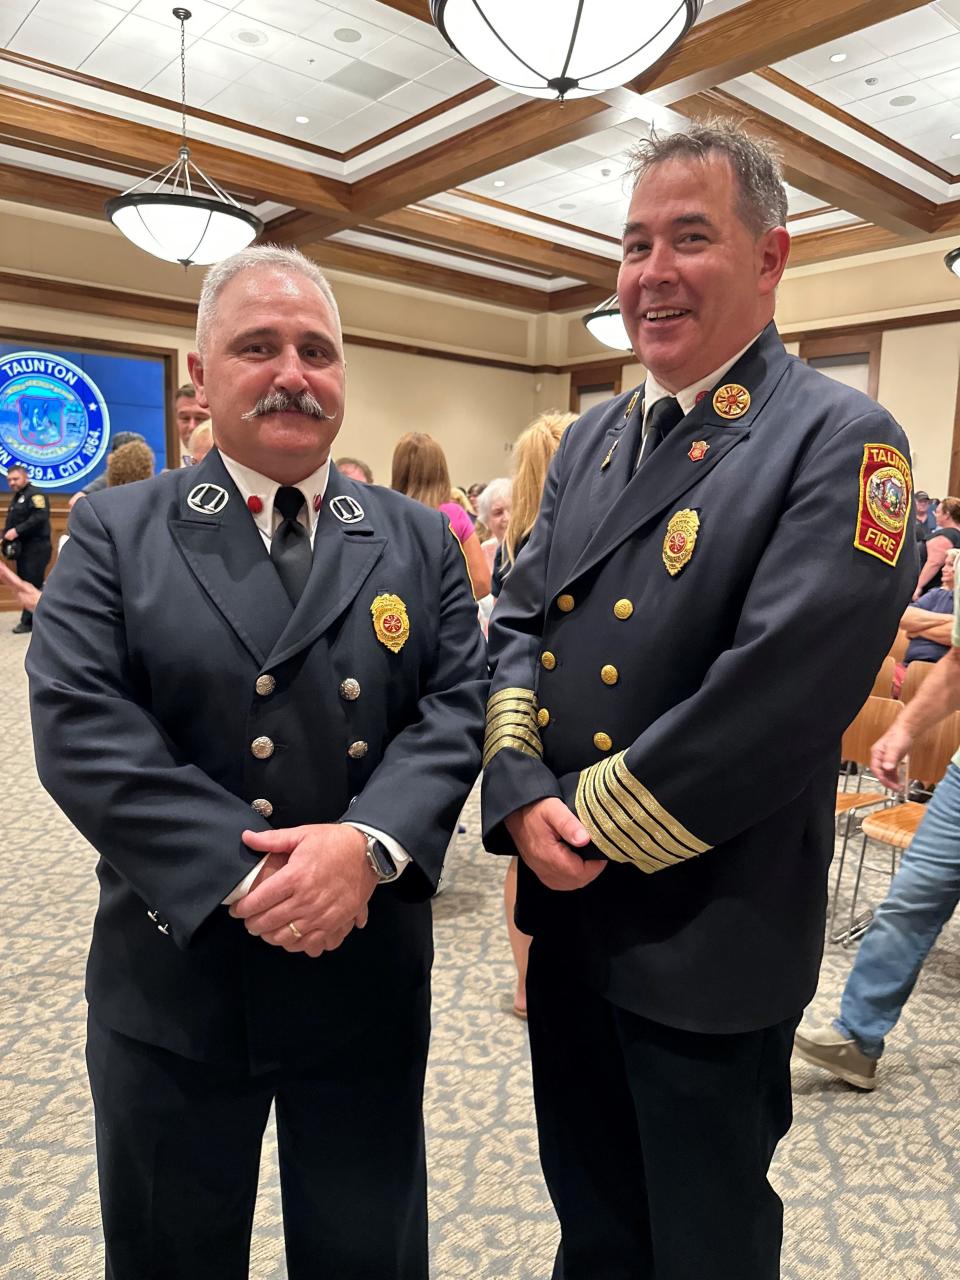 Retiring Taunton Fire Chief Timothy Bradshaw, right, passes the baton to brand new Taunton Fire Chief Steven Lavigne, left, and Lavigne's swearing-in in the City Council chambers on Tuesday, Aug. 8, 2023.